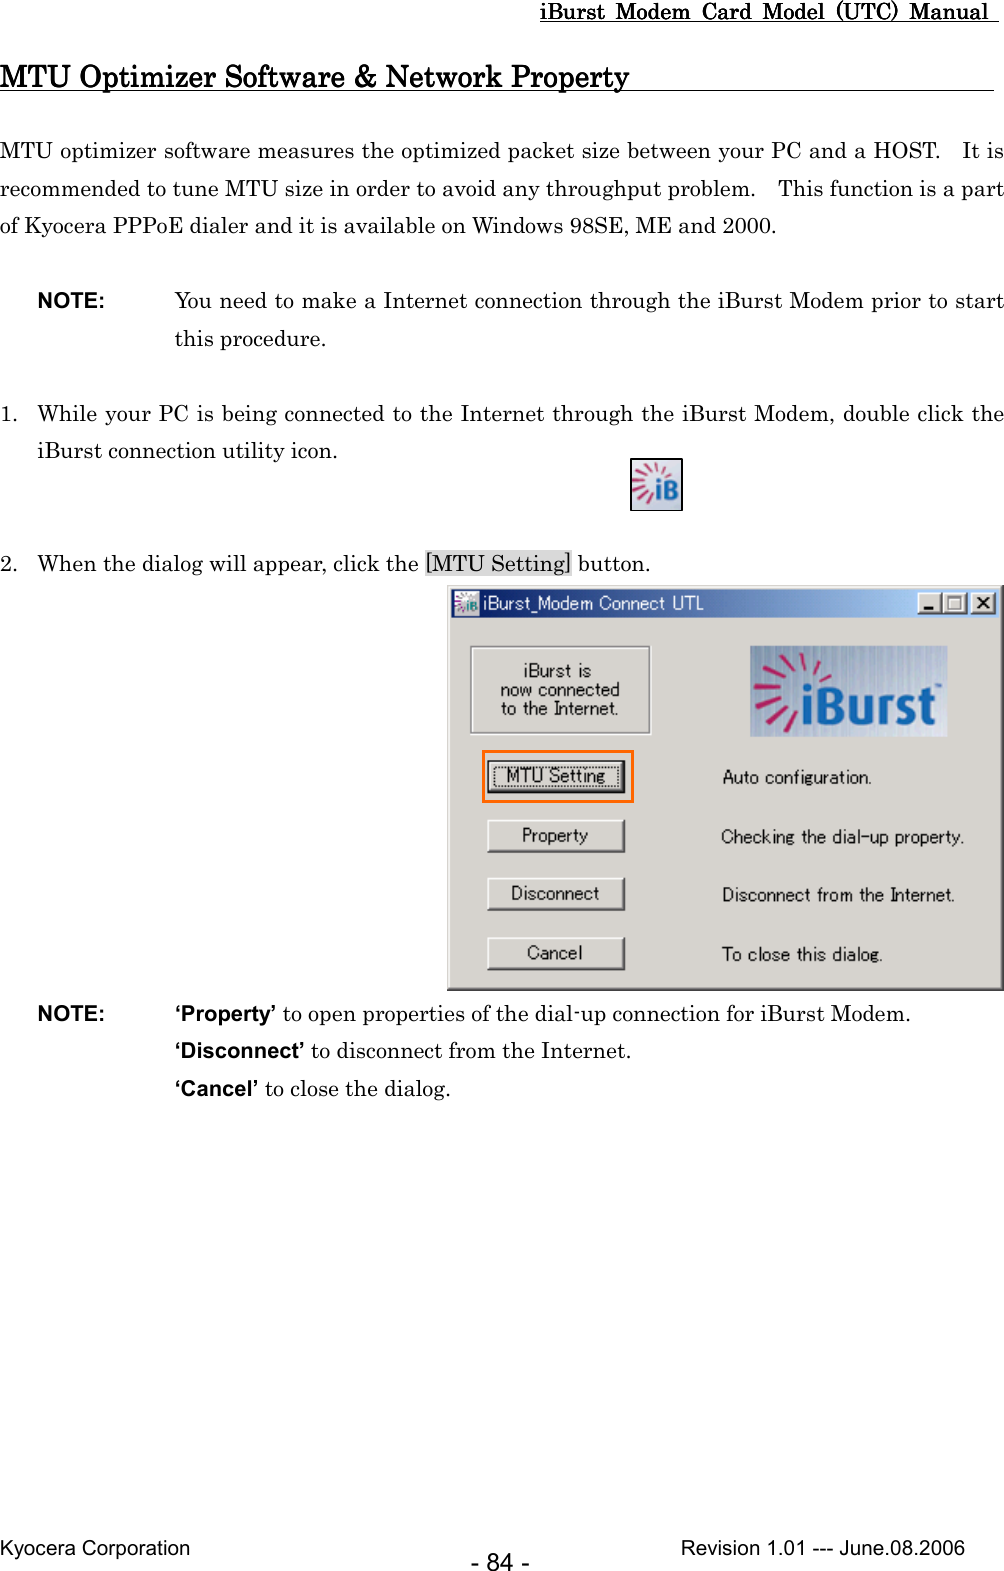 iBurst  Modem  Card  Model  (UTC)  Manual iBurst  Modem  Card  Model  (UTC)  Manual iBurst  Modem  Card  Model  (UTC)  Manual iBurst  Modem  Card  Model  (UTC)  Manual       Kyocera Corporation                                                                                              Revision 1.01 --- June.08.2006 - 84 - MTU Optimizer Software &amp; Network Property   MTU Optimizer Software &amp; Network Property   MTU Optimizer Software &amp; Network Property   MTU Optimizer Software &amp; Network Property                                                                                                                                                                                           MTU optimizer software measures the optimized packet size between your PC and a HOST.    It is recommended to tune MTU size in order to avoid any throughput problem.    This function is a part of Kyocera PPPoE dialer and it is available on Windows 98SE, ME and 2000.  NOTE:  You need to make a Internet connection through the iBurst Modem prior to start this procedure.  1. While your PC is being connected to the Internet through the iBurst Modem, double click the iBurst connection utility icon.   2. When the dialog will appear, click the [MTU Setting] button.     NOTE:  ‘Property’ to open properties of the dial-up connection for iBurst Modem. ‘Disconnect’ to disconnect from the Internet. ‘Cancel’ to close the dialog.  